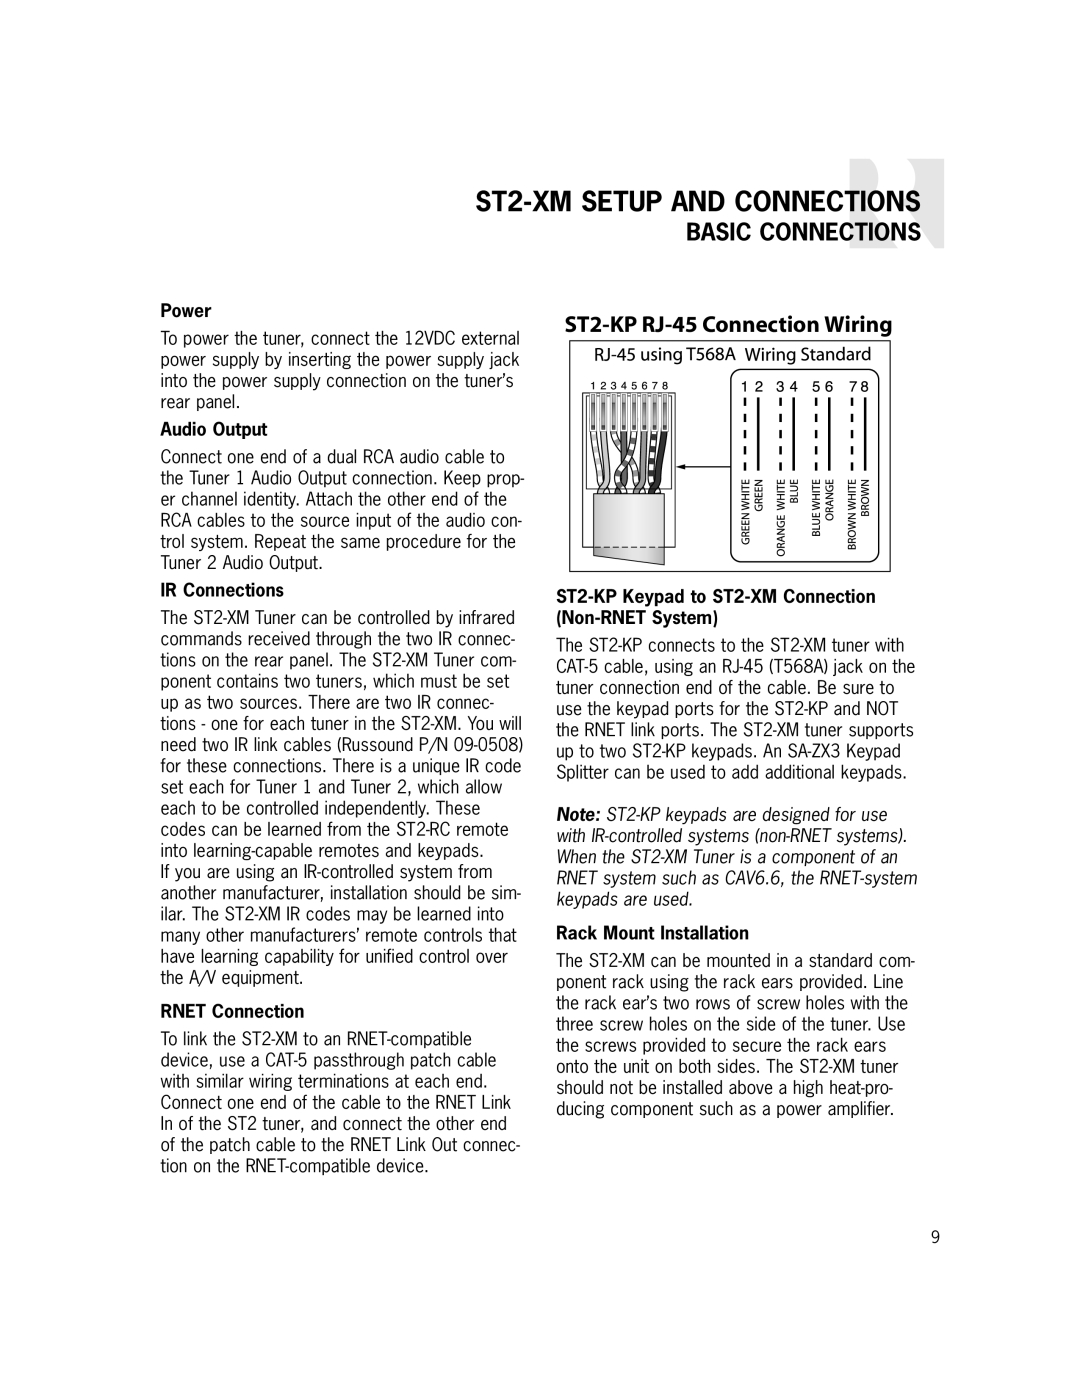 Russound manual ST2-XMSETUP AND CONNECTIONS, Basic Connections, ST2-KP RJ-45Connection Wiring 